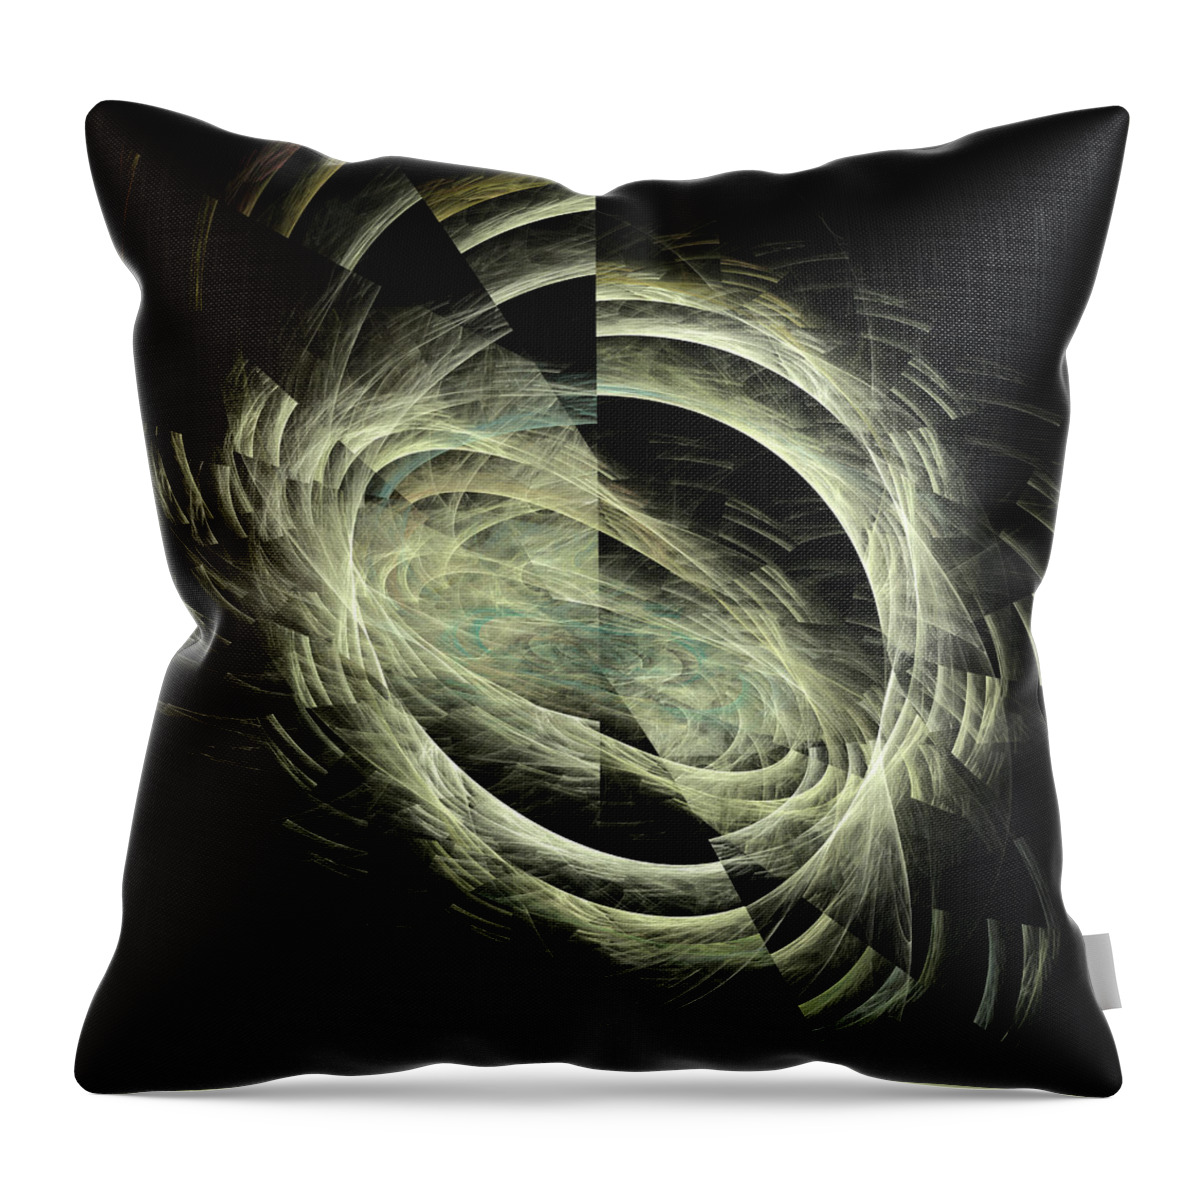 Background Throw Pillow featuring the digital art Fragmented Minds by Tim Abeln